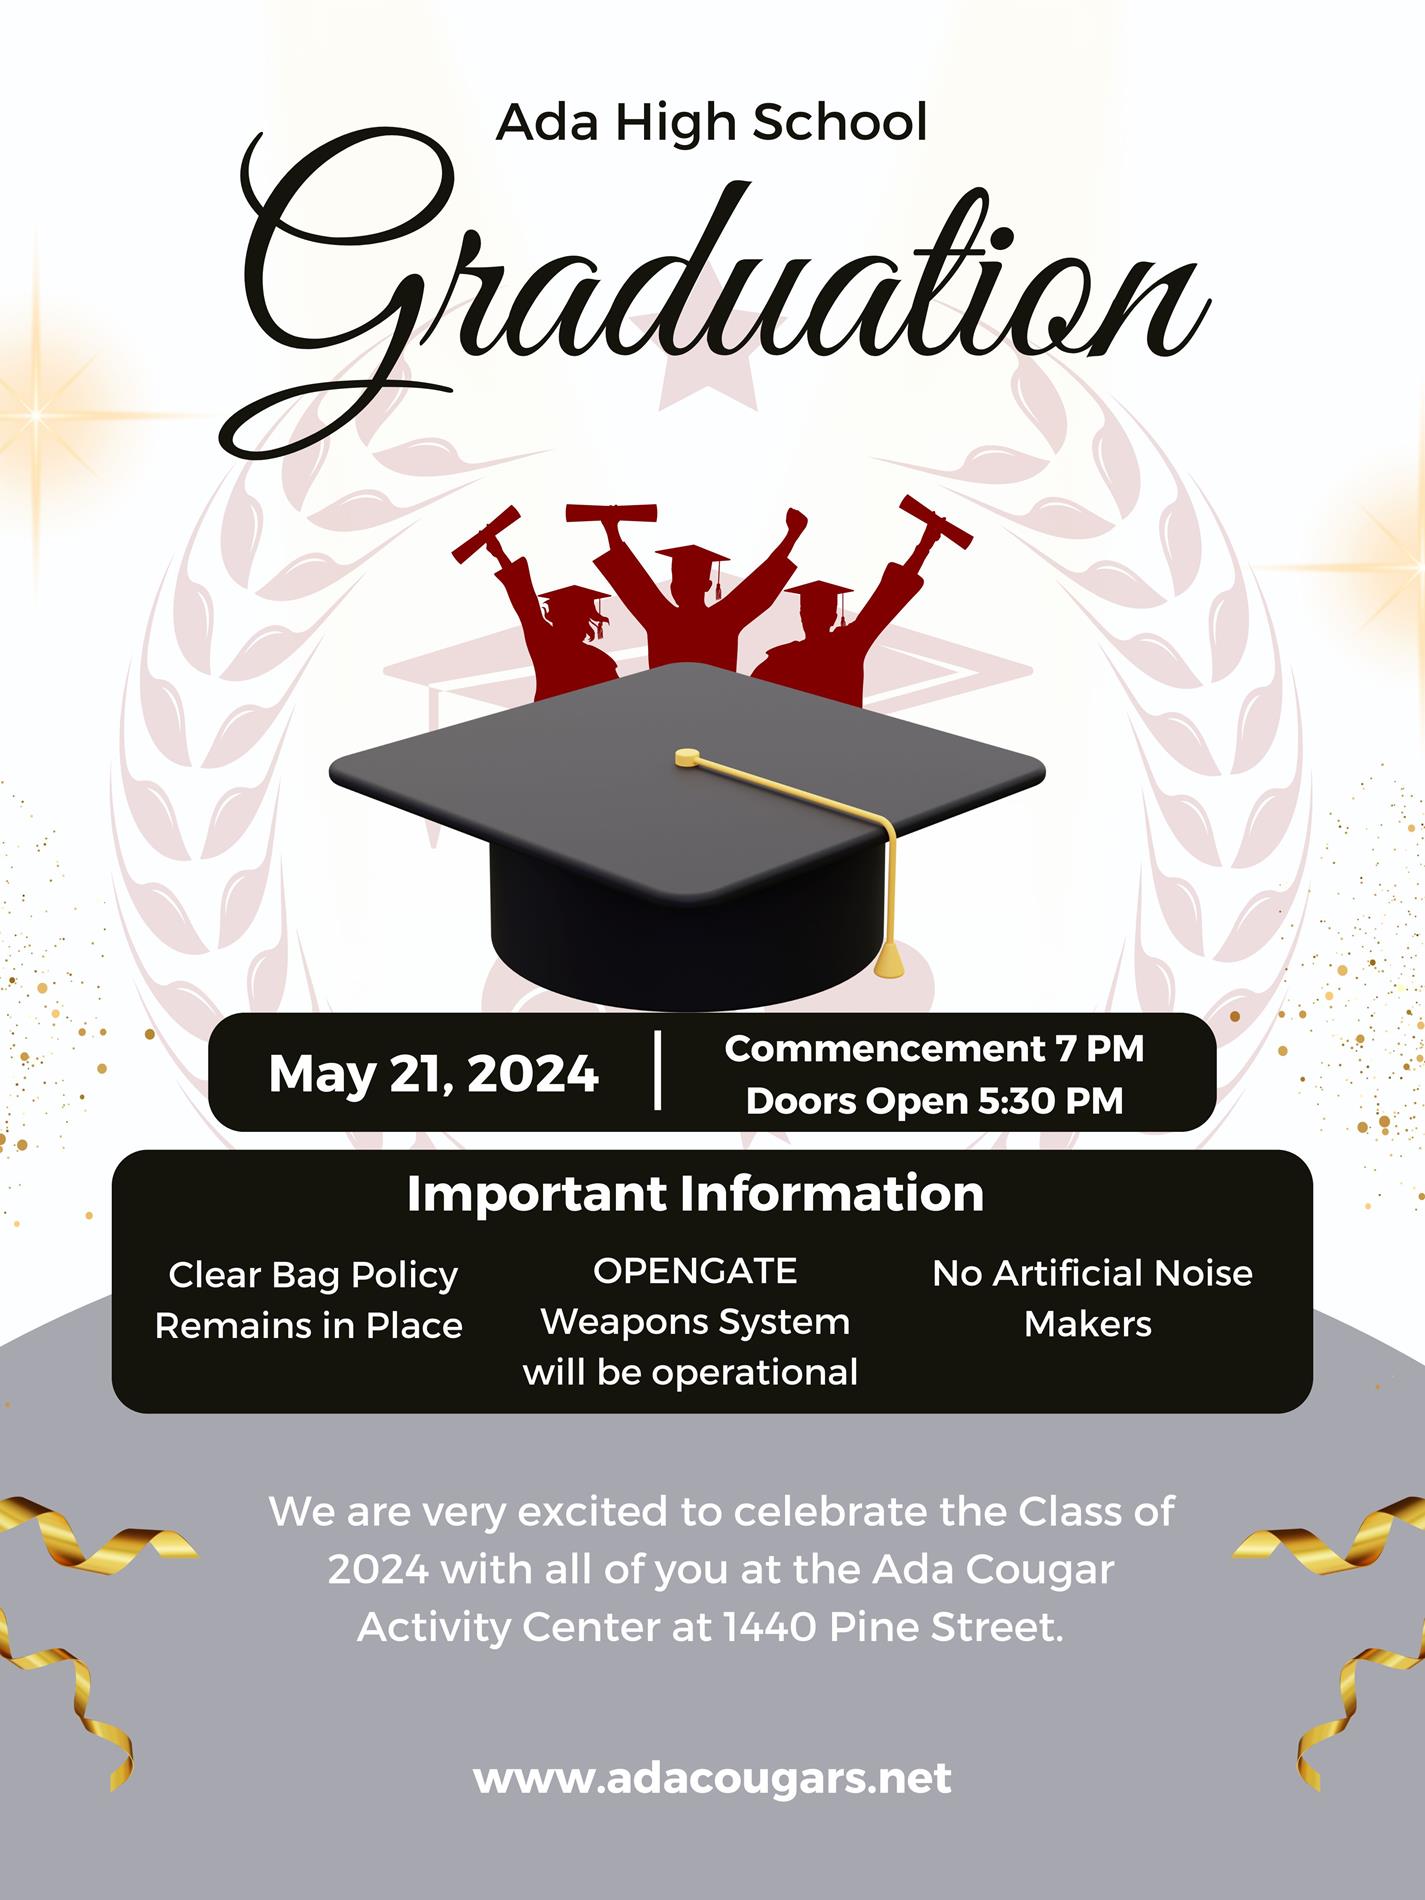 Updated Informational Graphic for Graduation